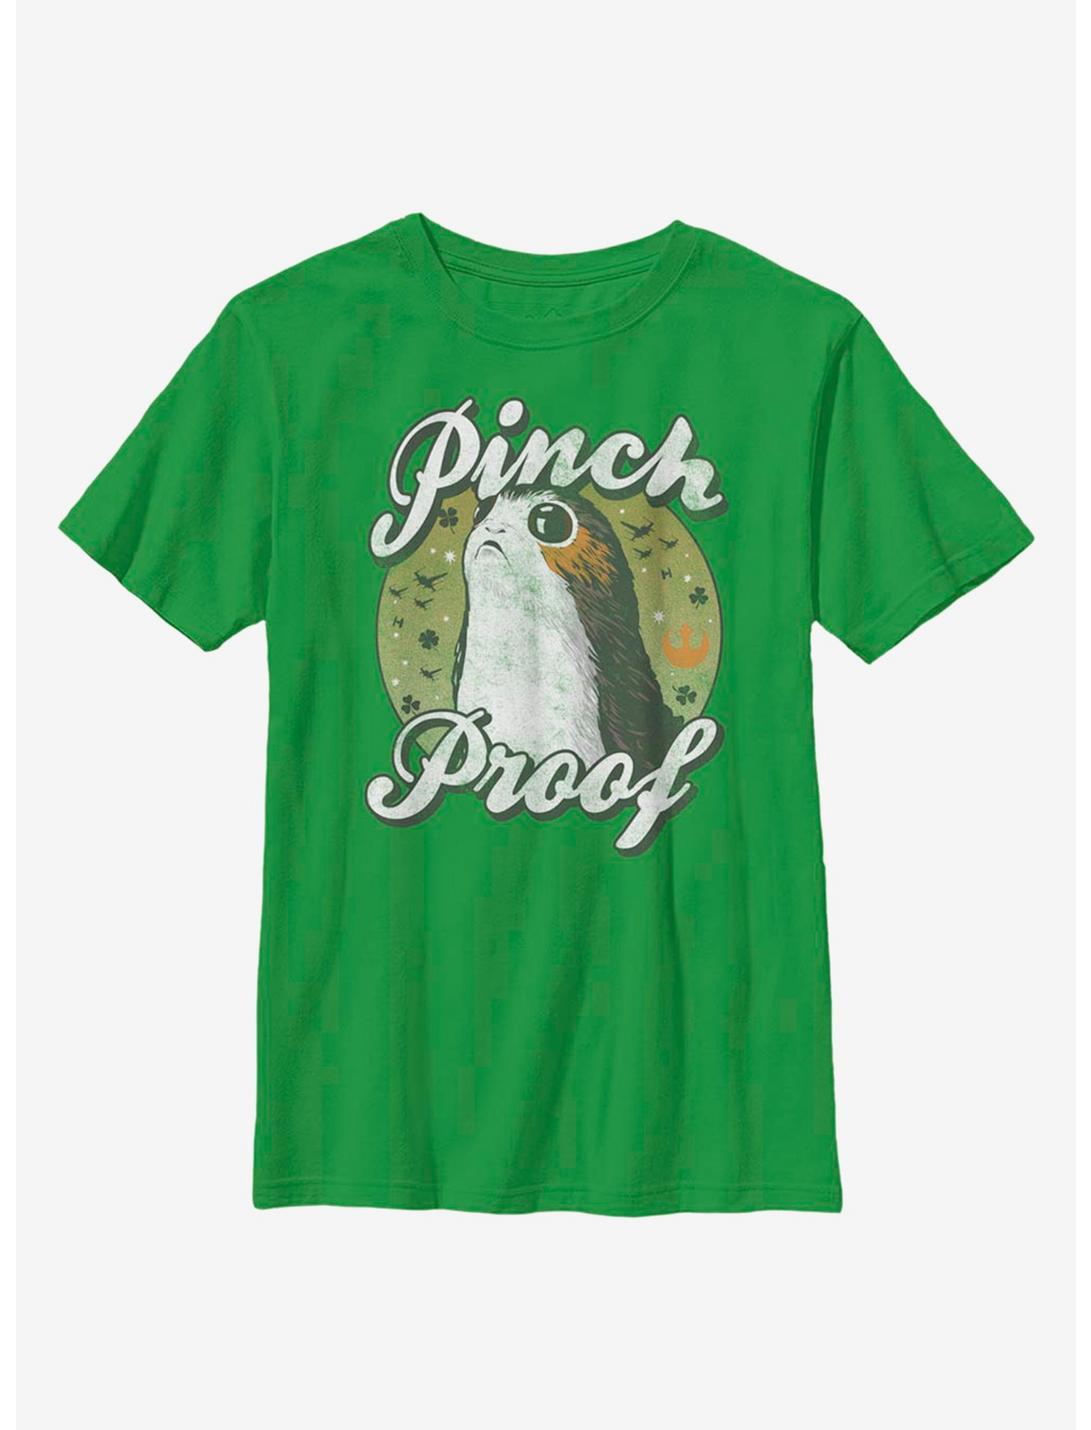 Star Wars: The Last Jedi Pinch Proof Porg Youth T-Shirt, KELLY, hi-res